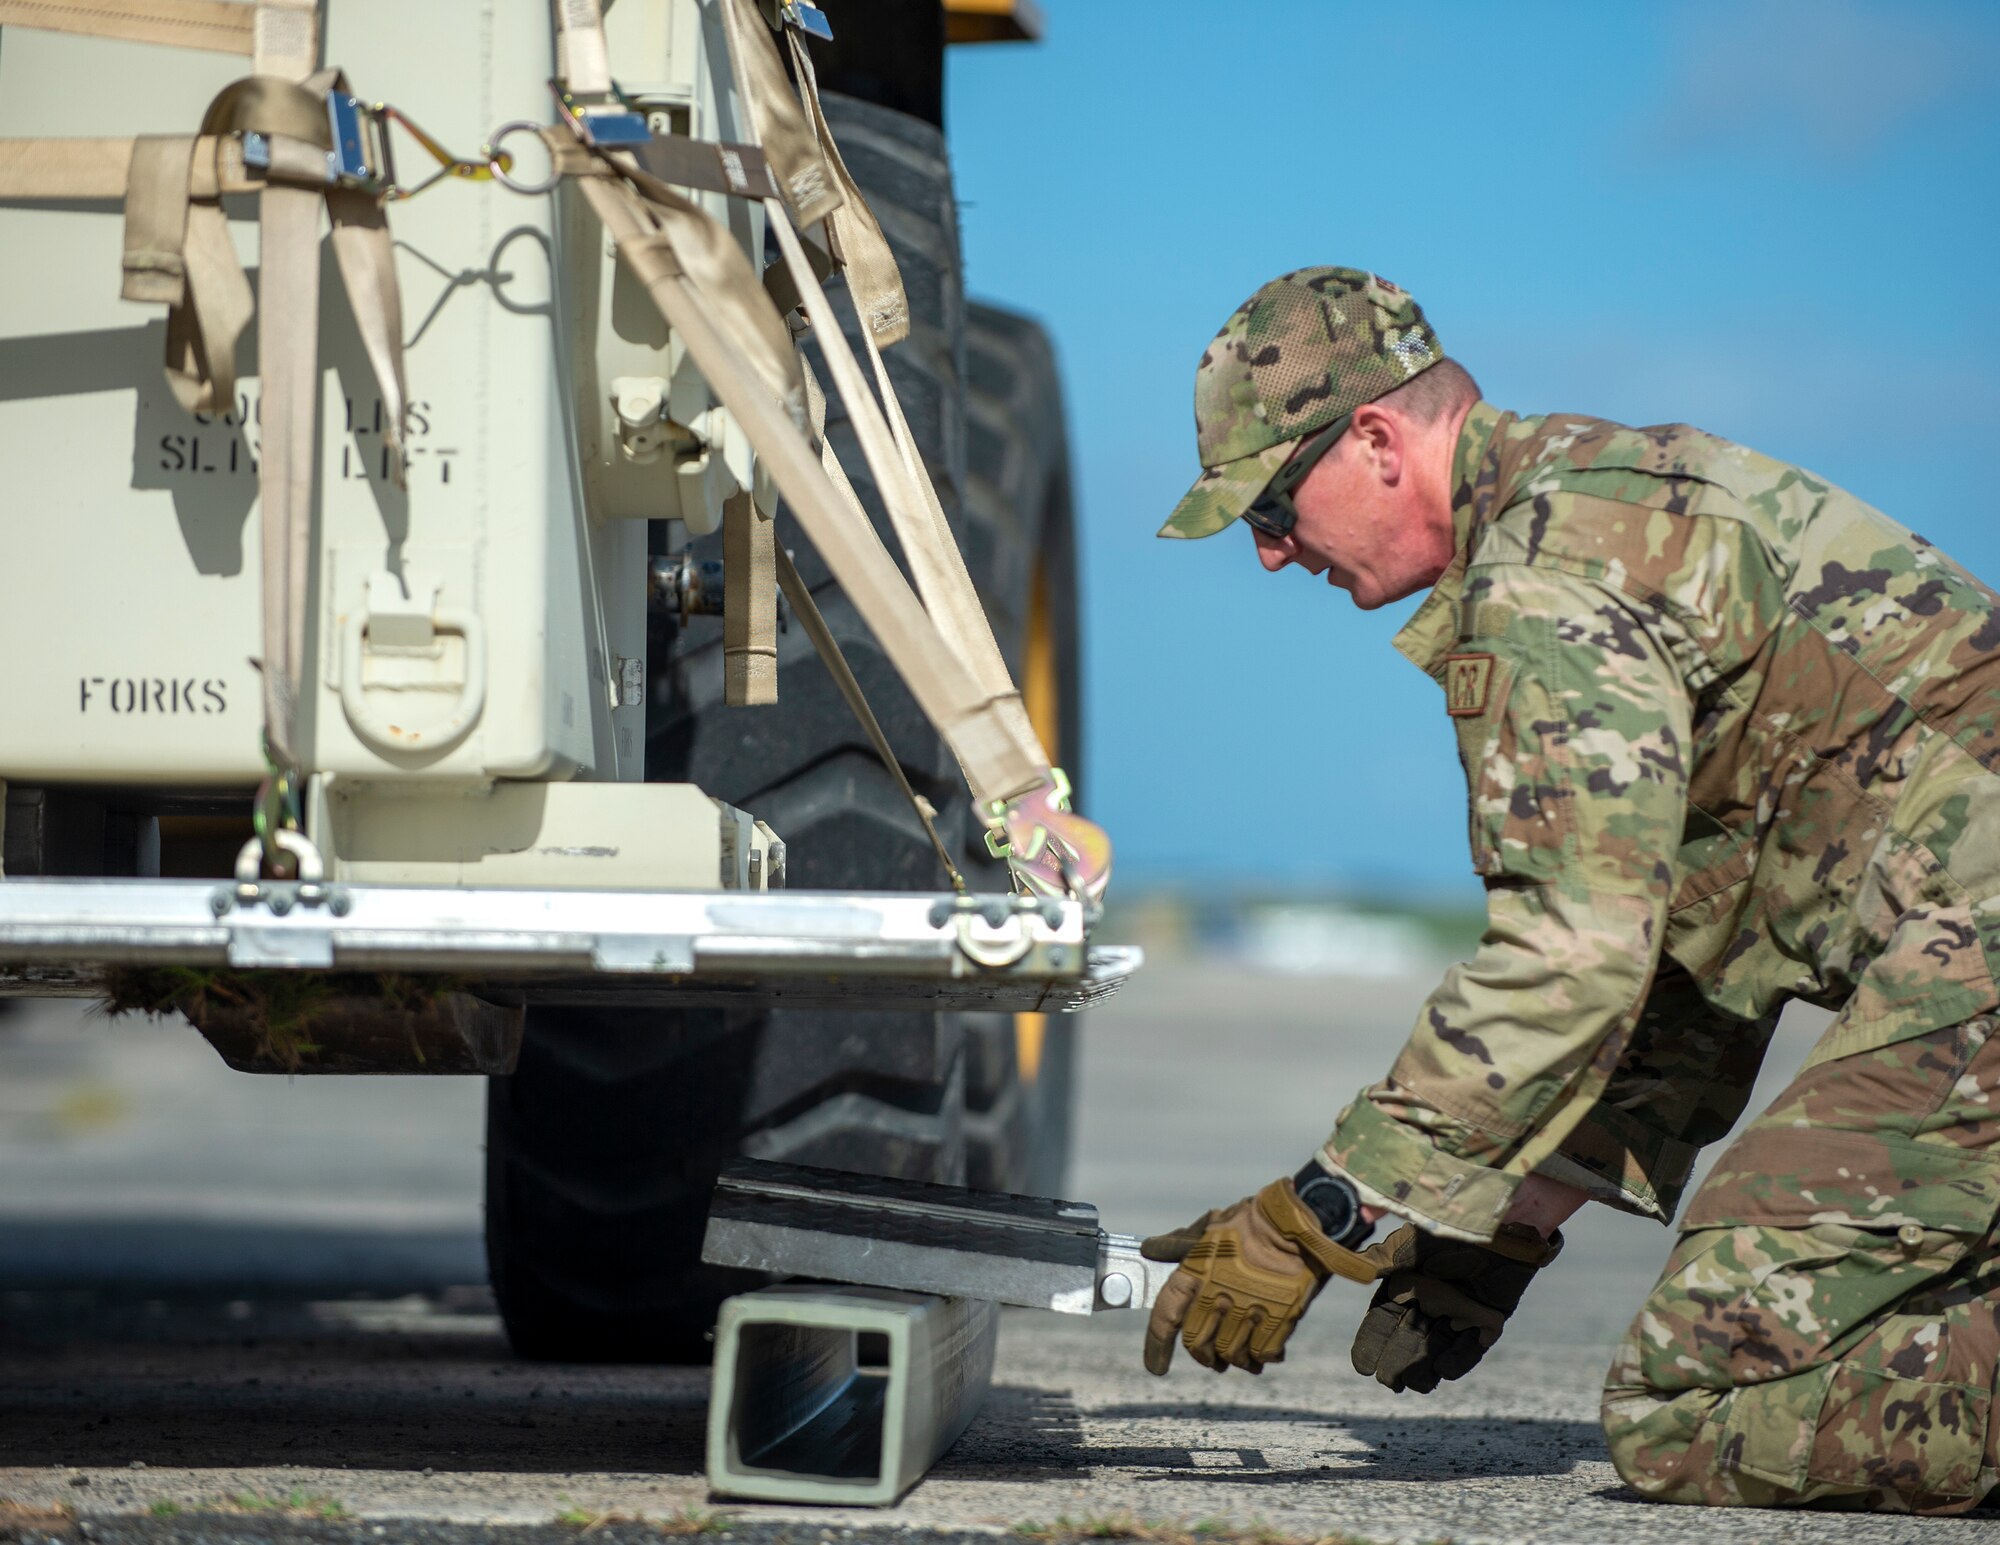 U.S. Air Force Tech. Sgt. Ross Wehrle, 133rd Contingency Response Flight, Minnesota Air National Guard, prepares to weigh a pallet in St. Croix, Virgin Islands, Aug. 18, 2021.